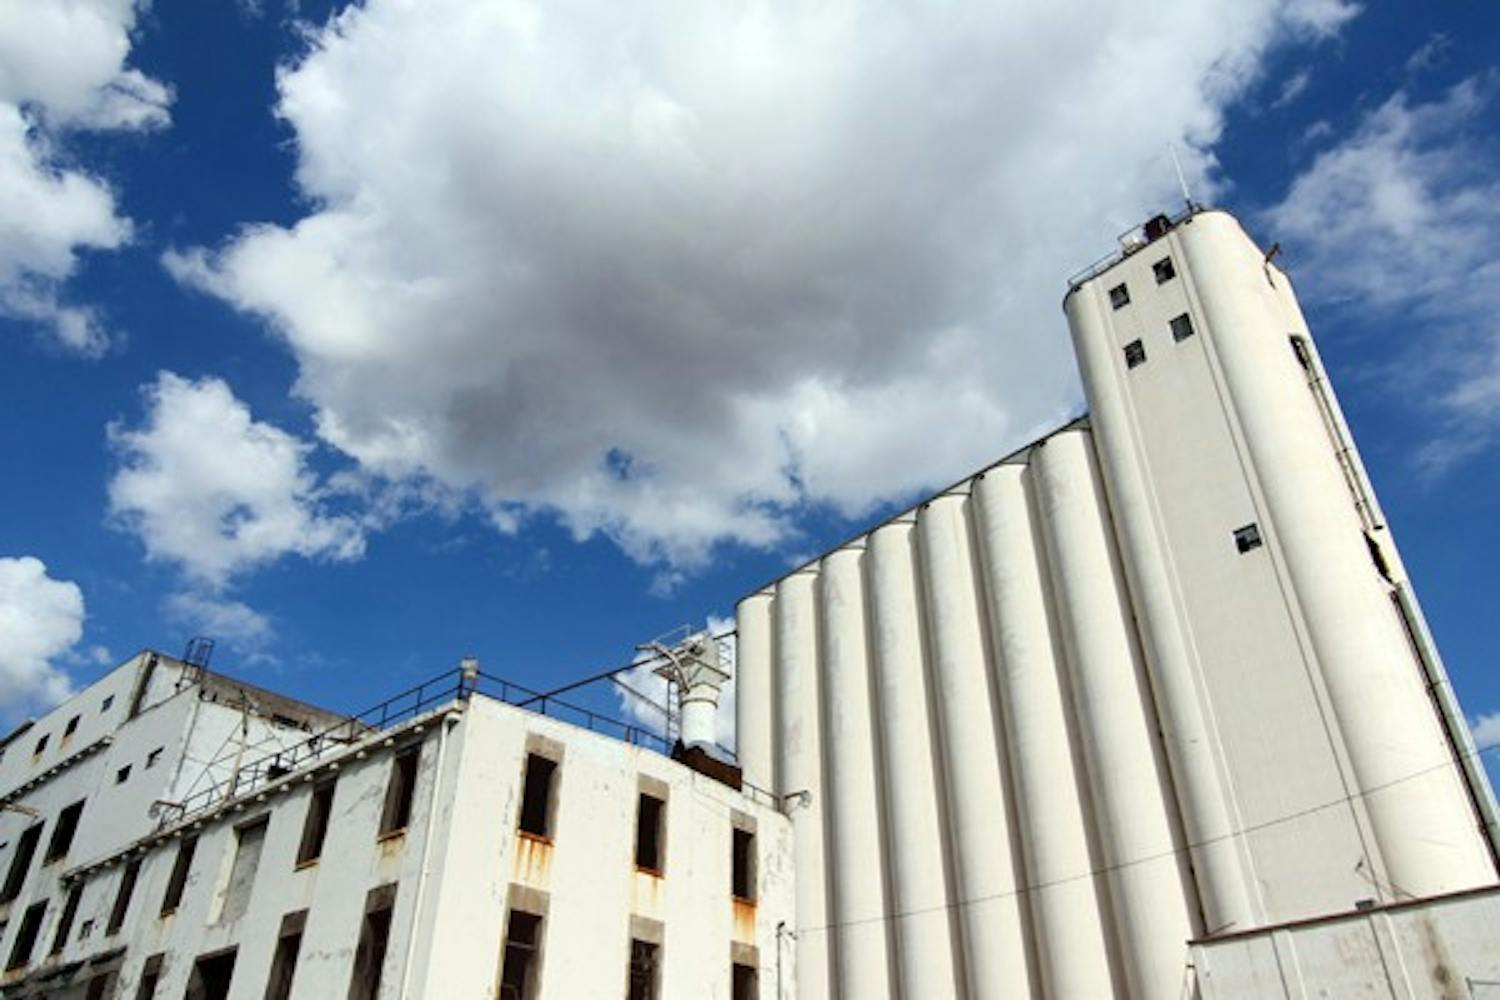 FACELIFT: Tempe is moving forward with the Hayden Flour Mill Revitalization project this week, which will restore the mill as a hub for community events. (Photo by Lisa Bartoli)